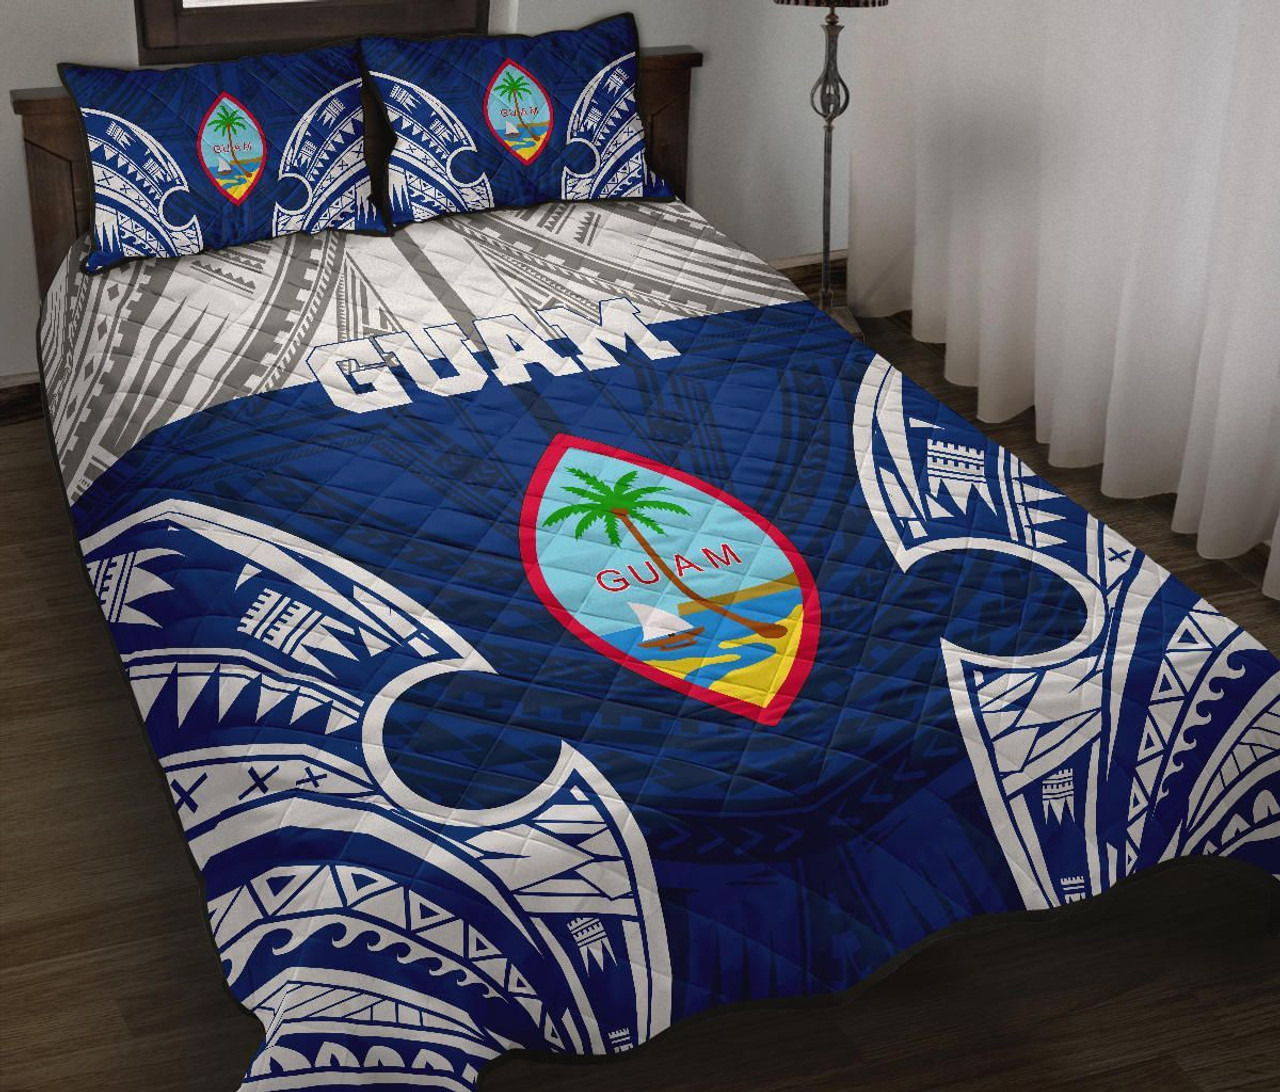 Guam Polynesian Quilt Bed Set - Pattern With Seal Blue Version 2